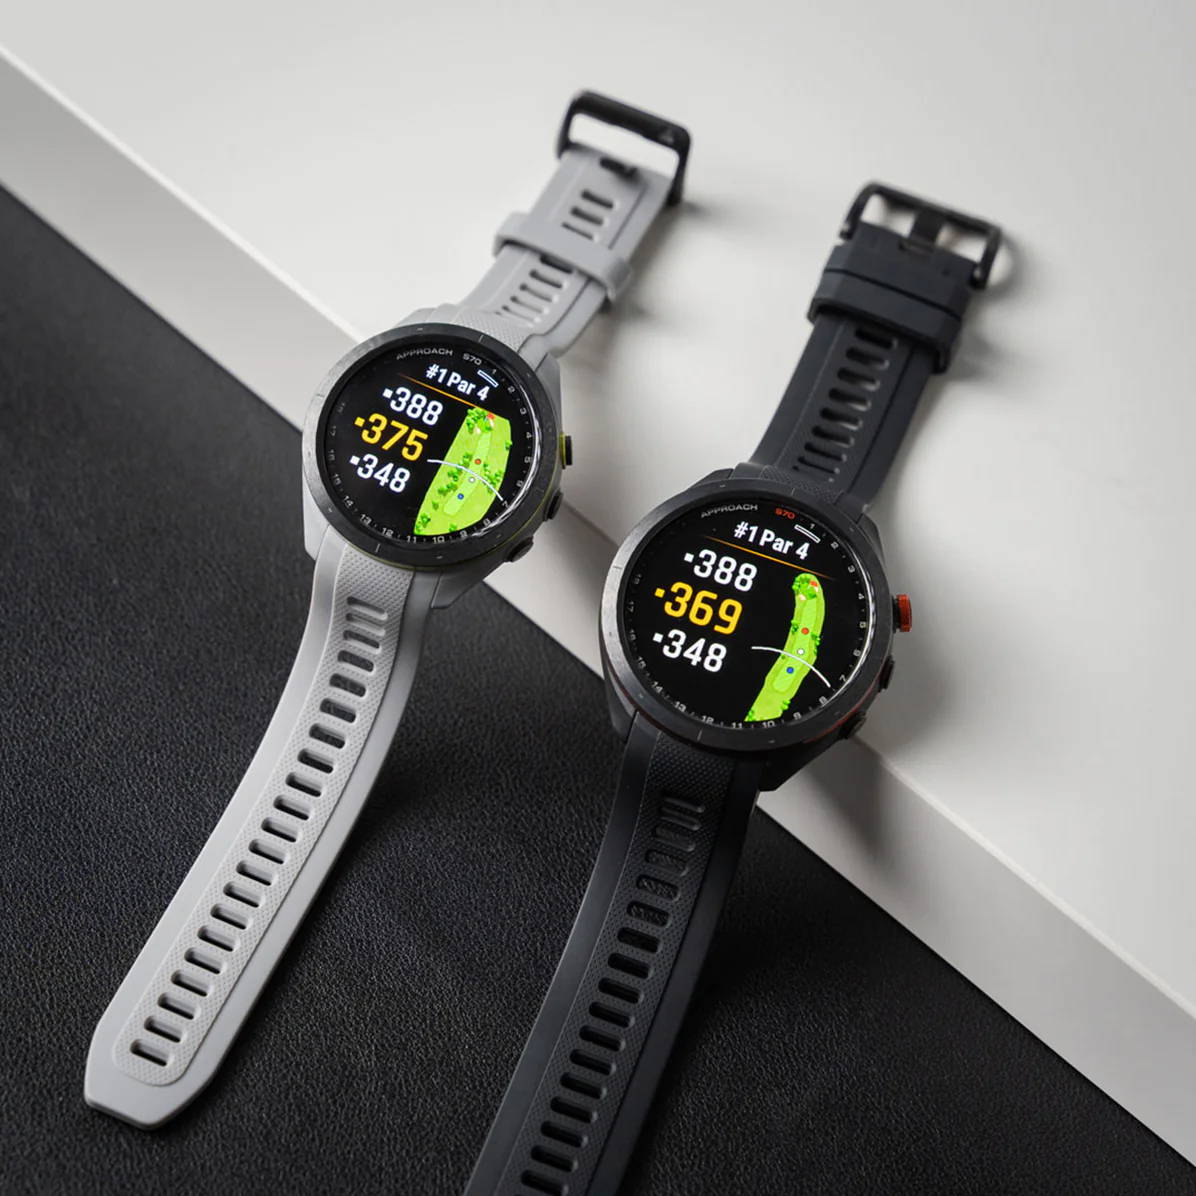 Gray 42 mm Garmin Approach S70  and black 47 mm Approach S70 golf watches side by side